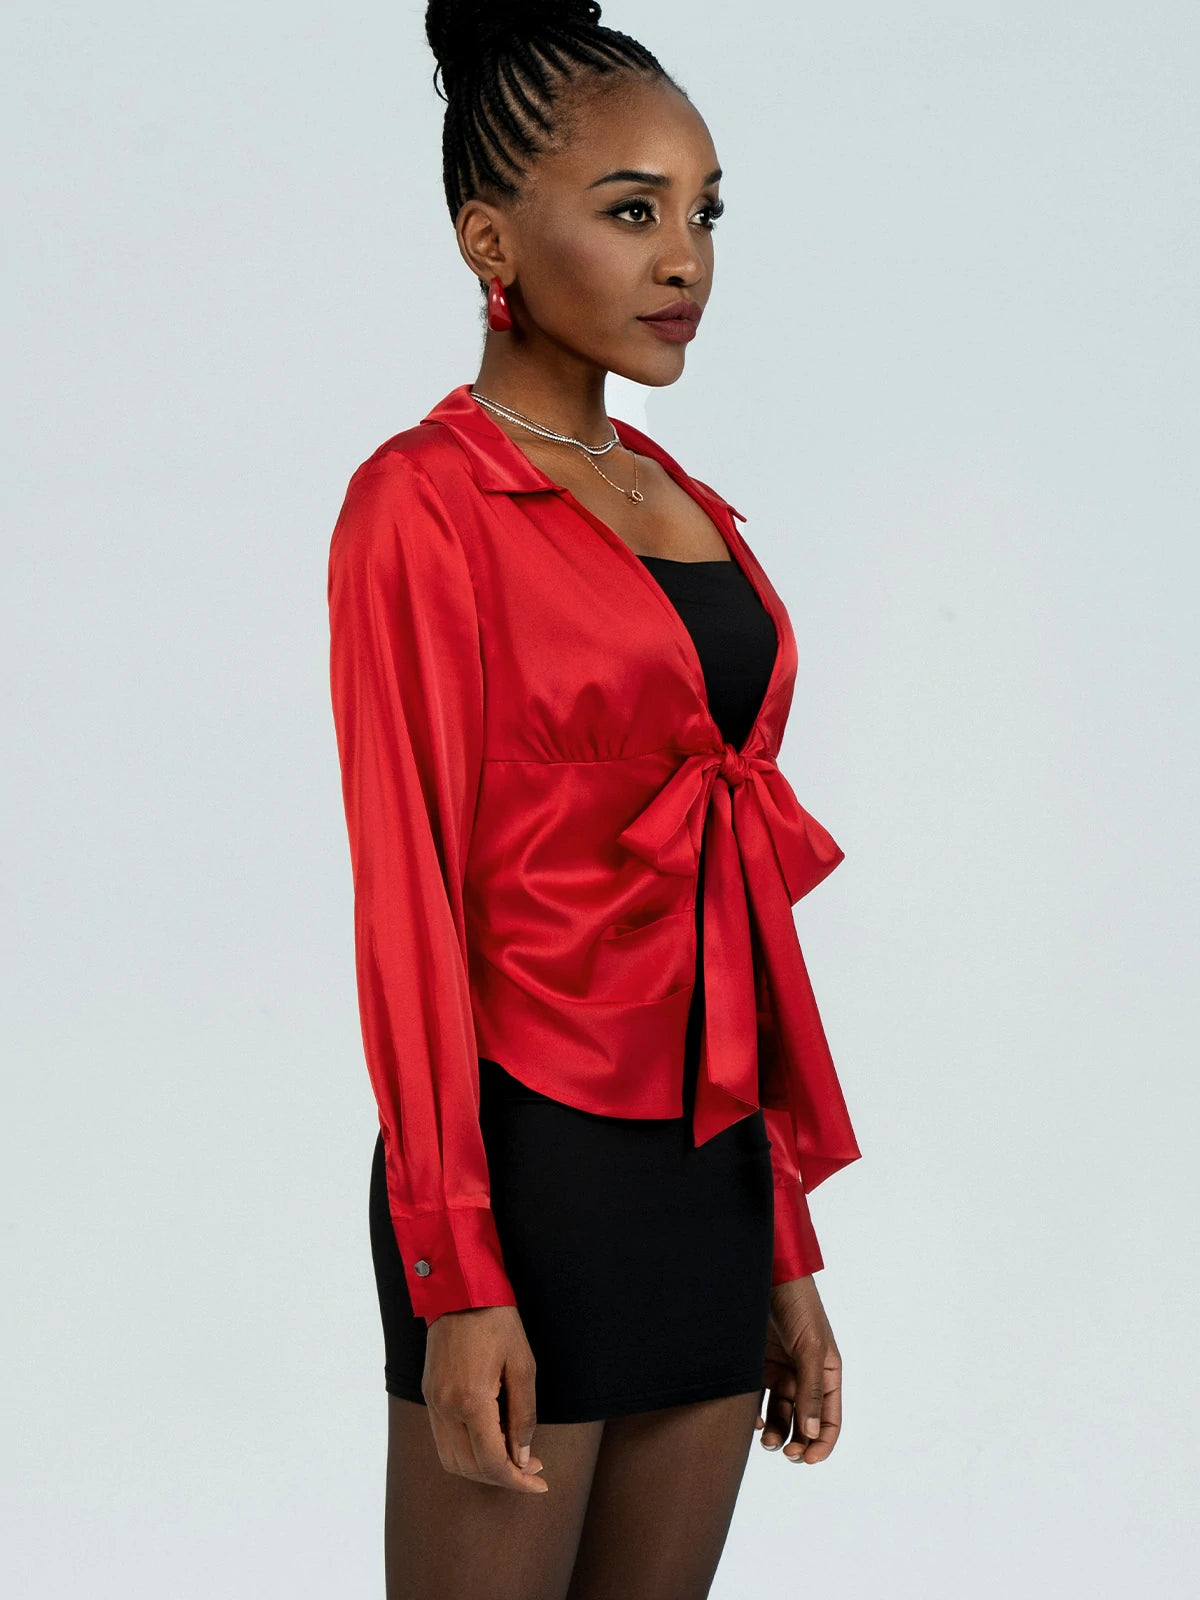 Elegant red shirt featuring satin fabric and front tie detail